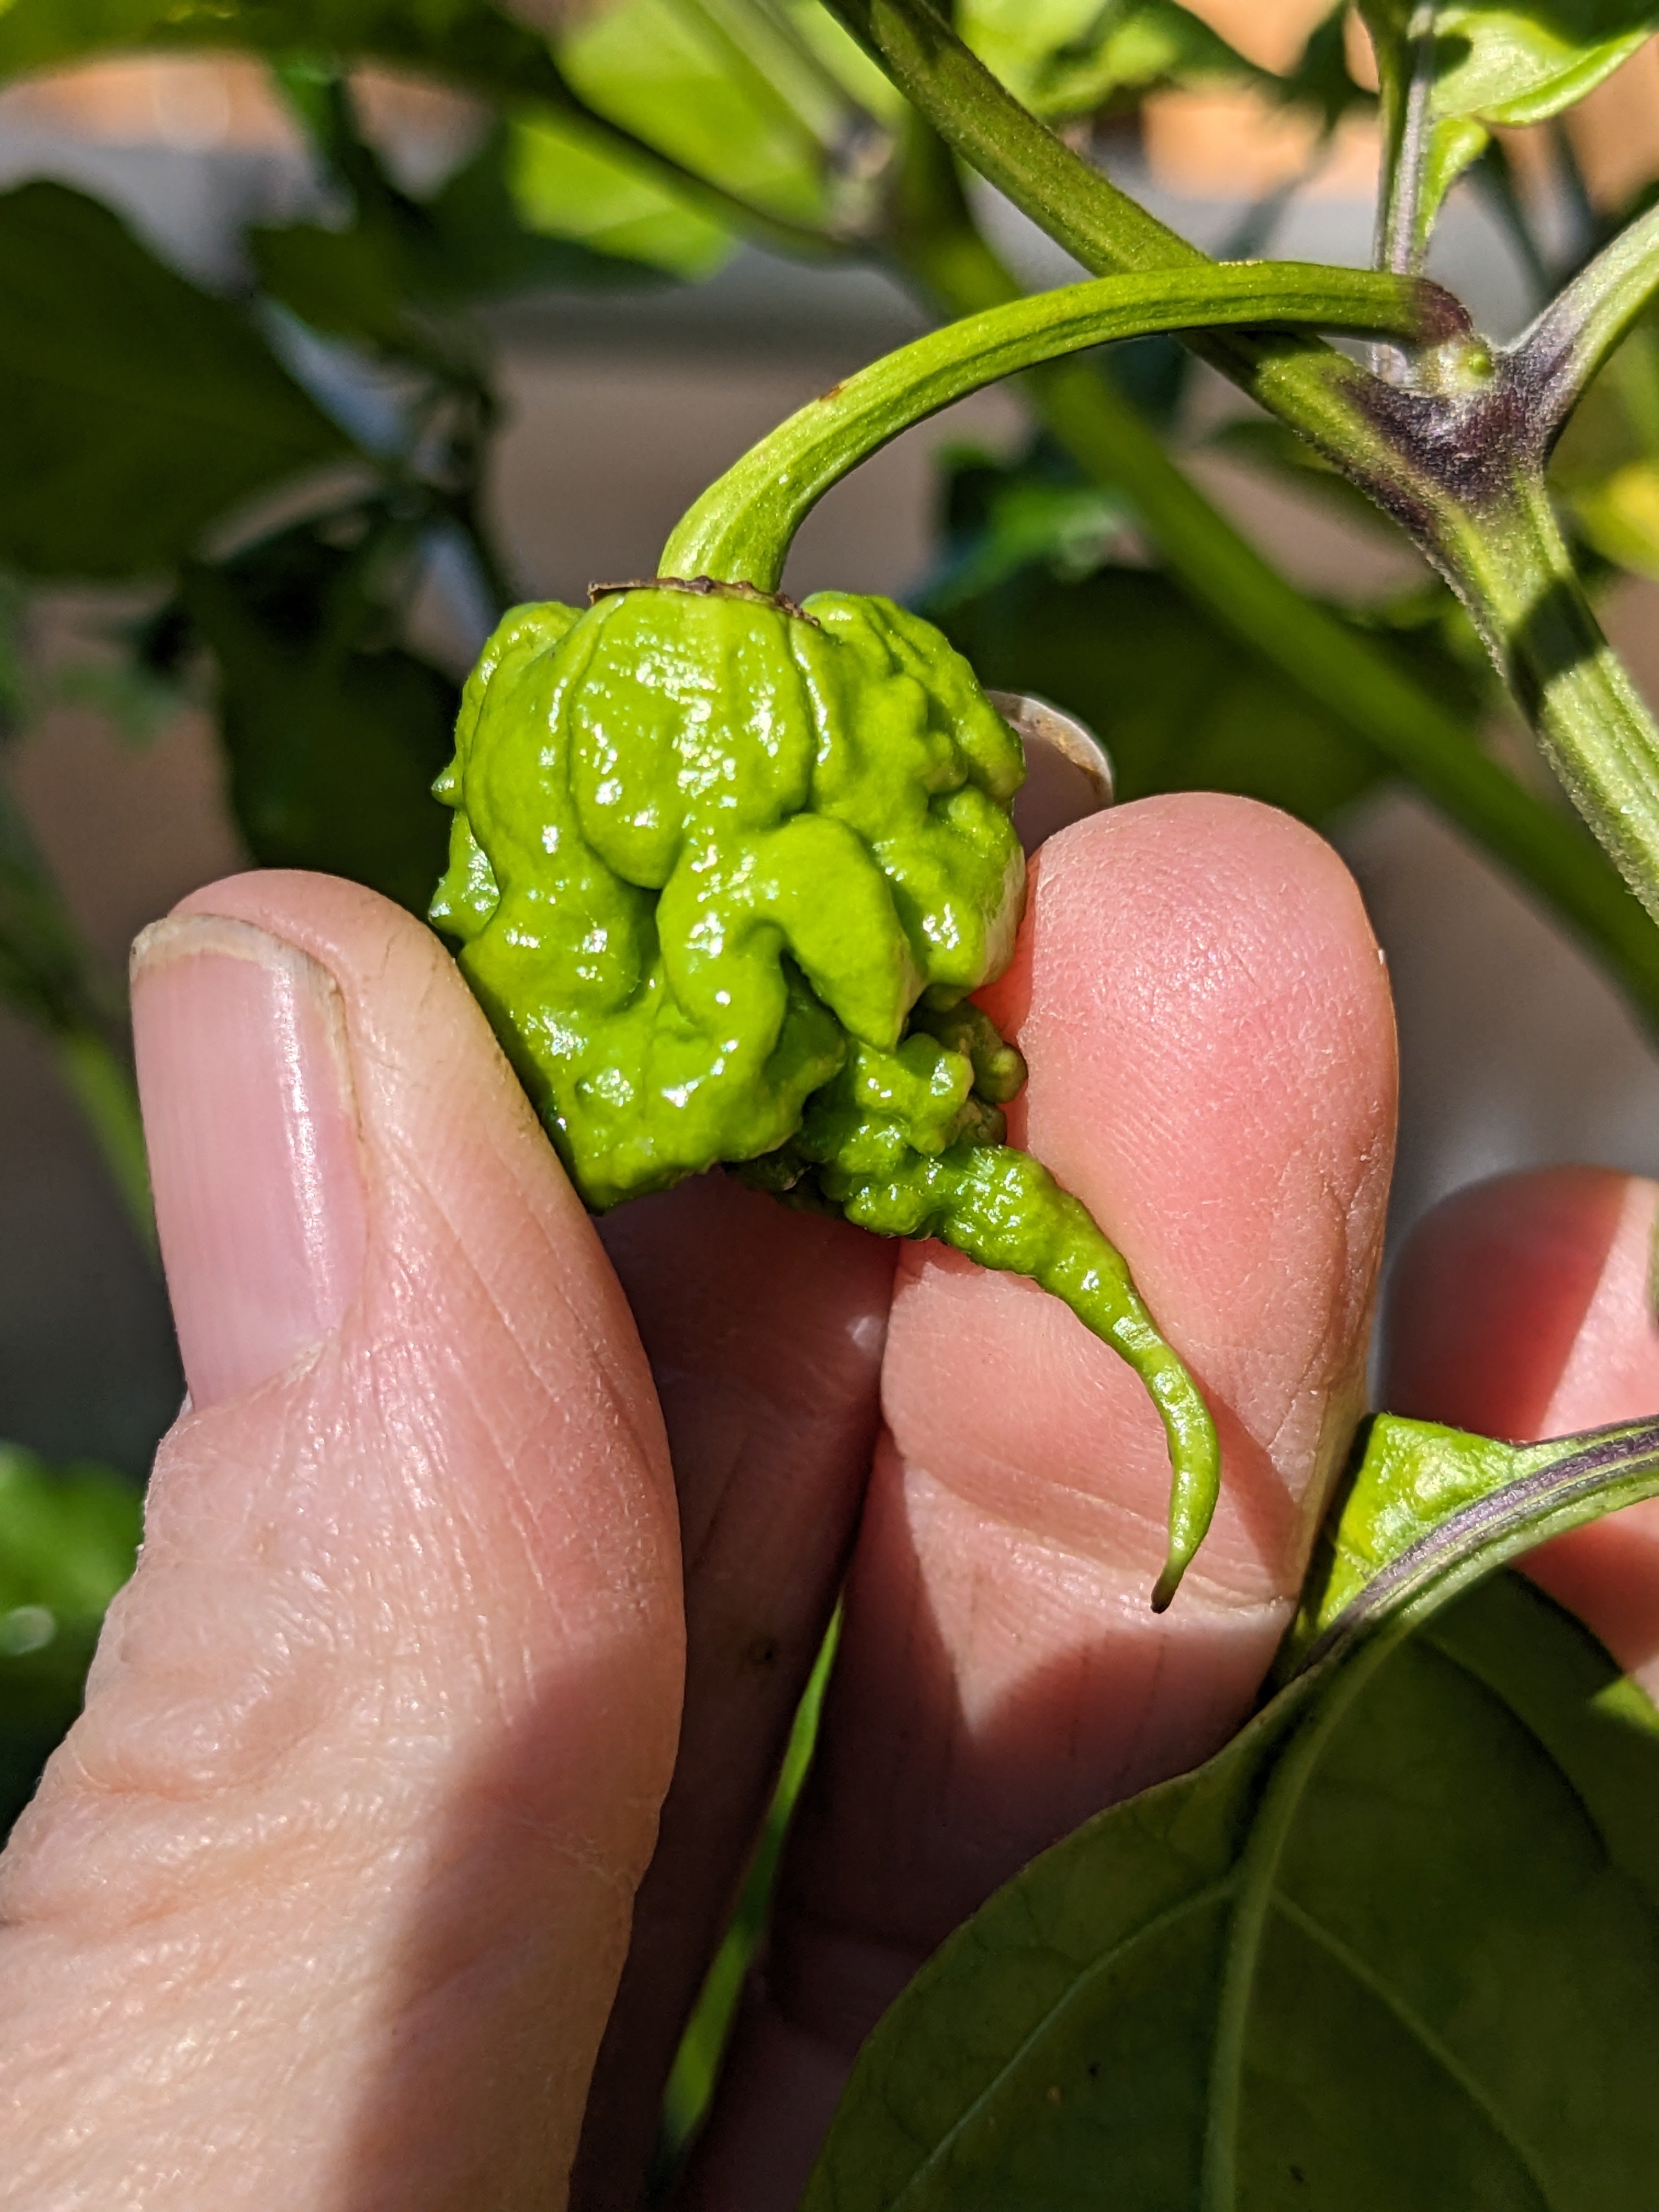 Hottest Peppers in the World: Unripe Carolina Reaper - look at that tail!